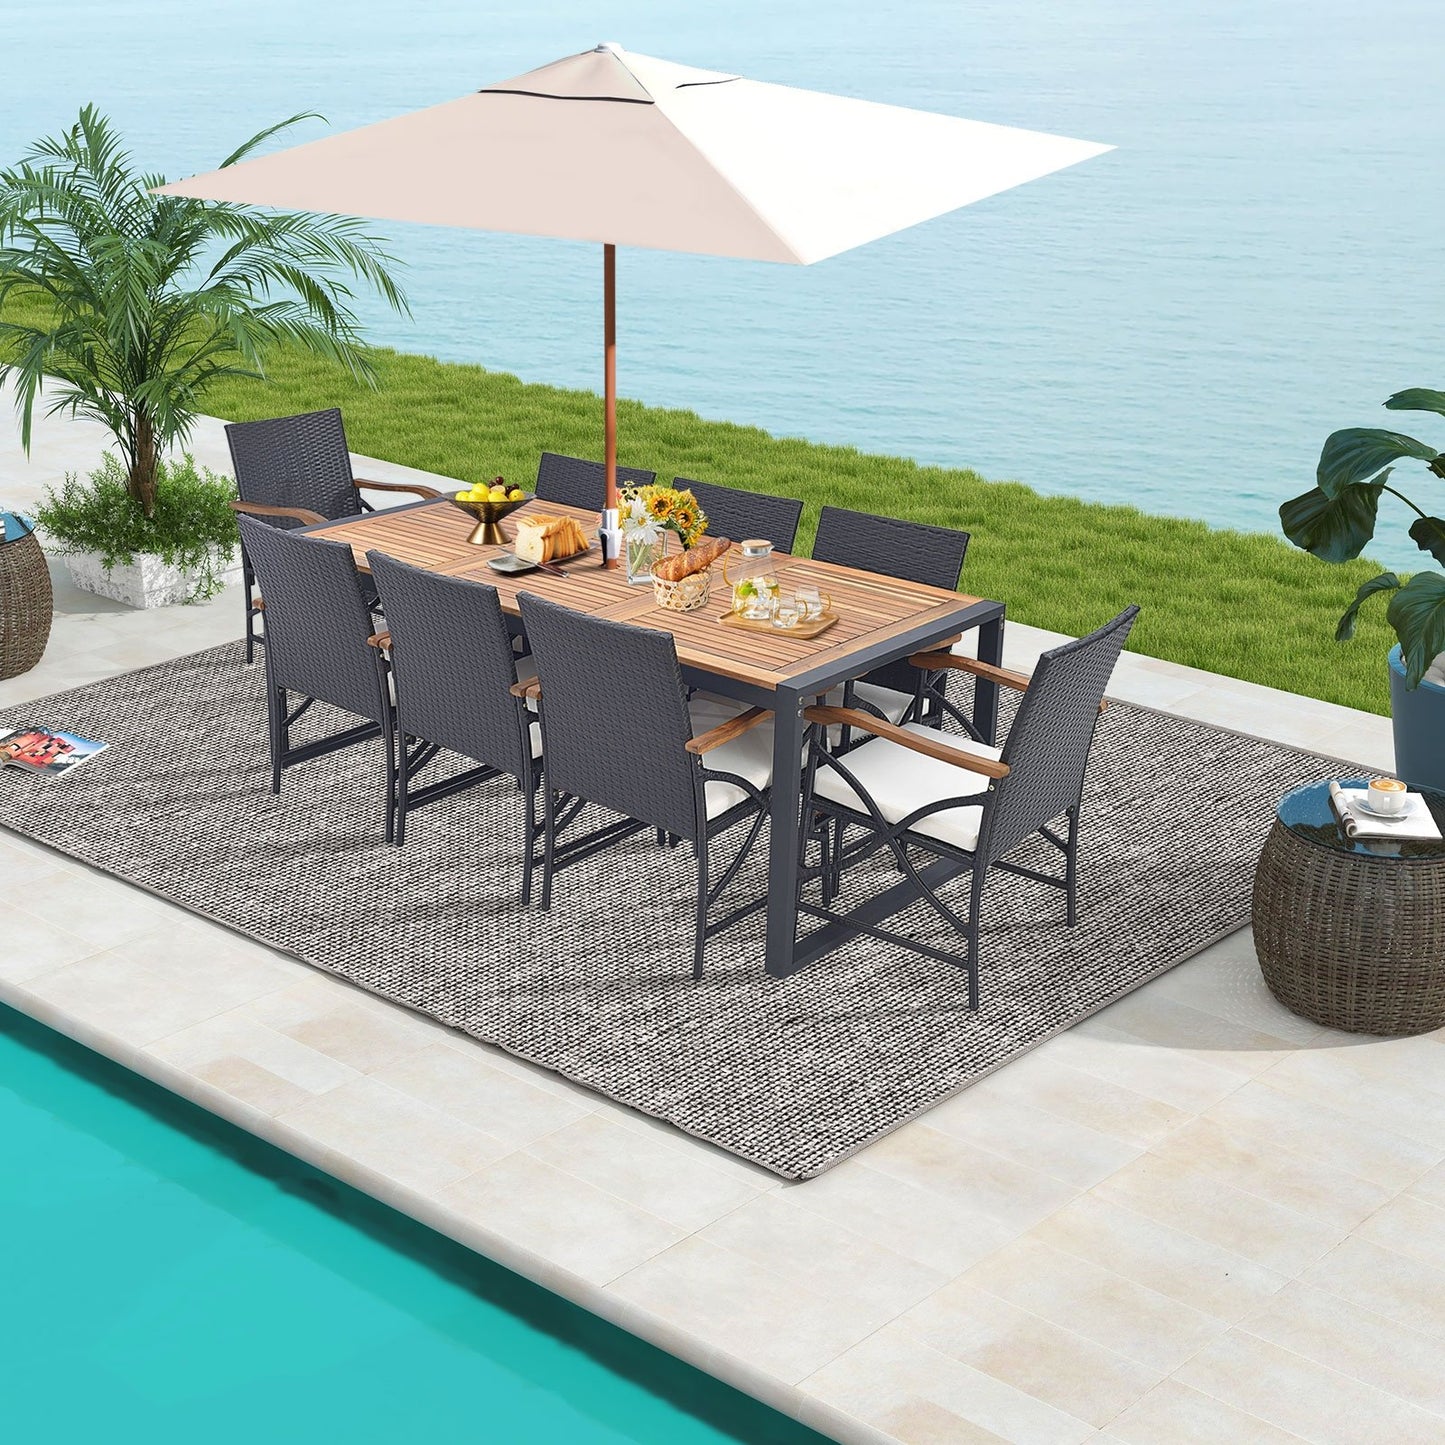 9 Pieces  Patio Rattan Dining Set with Acacia Wood Table for Backyard  Garden-X-side Handrail